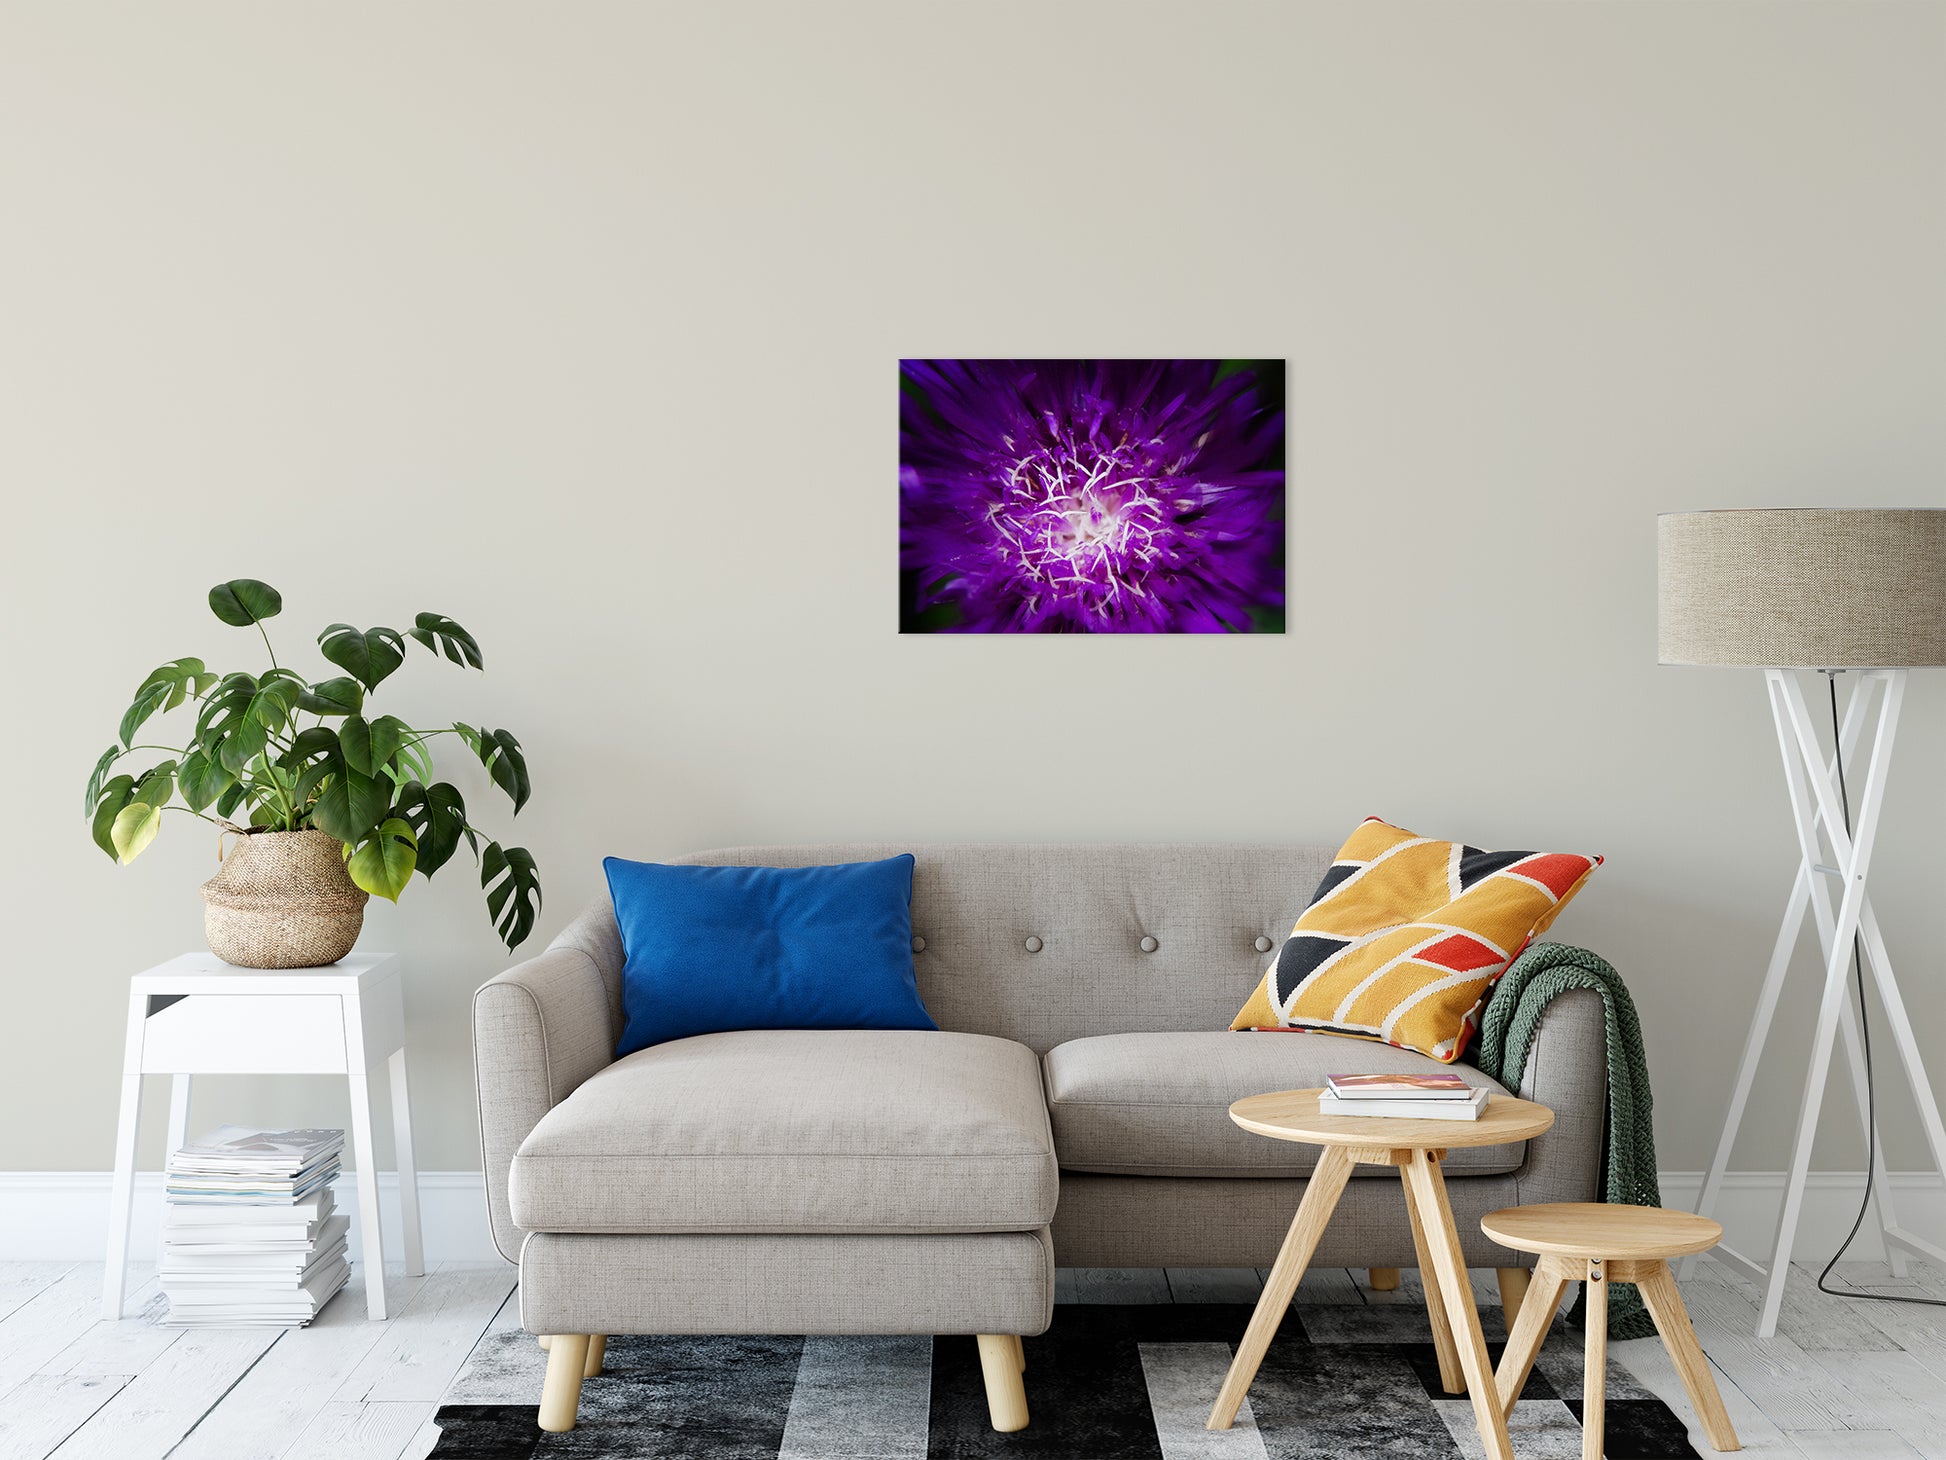 Flower Wall Art For Bedroom: Abstract Flower Nature / Floral Photo Fine Art Canvas Wall Art Prints 20" x 30" - PIPAFINEART